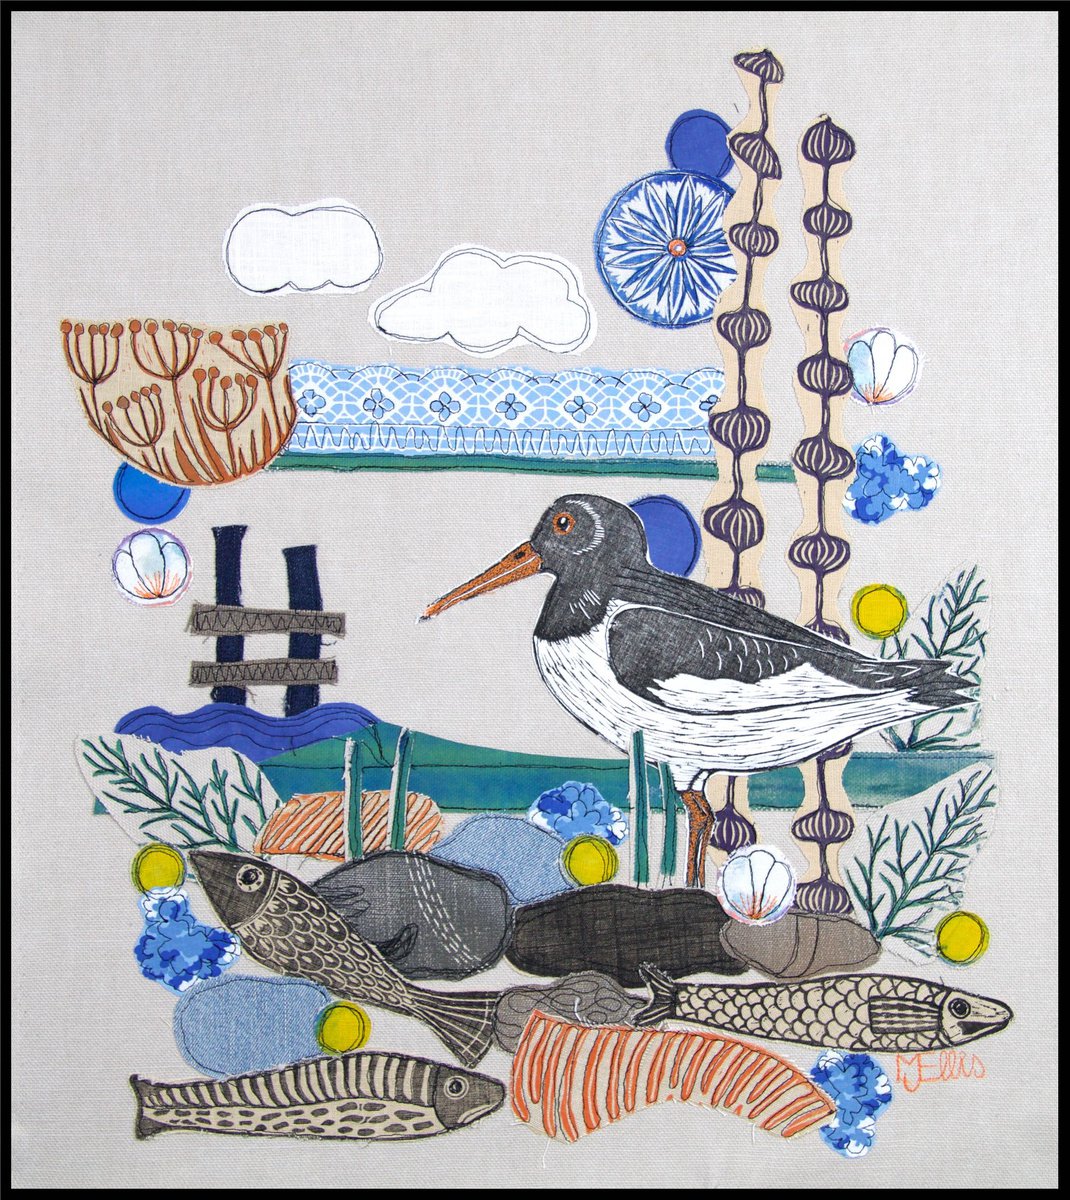 Oystercatcher, linocut textile collage with all handprinted fabrics and embroidery by Mariann Johansen-Ellis